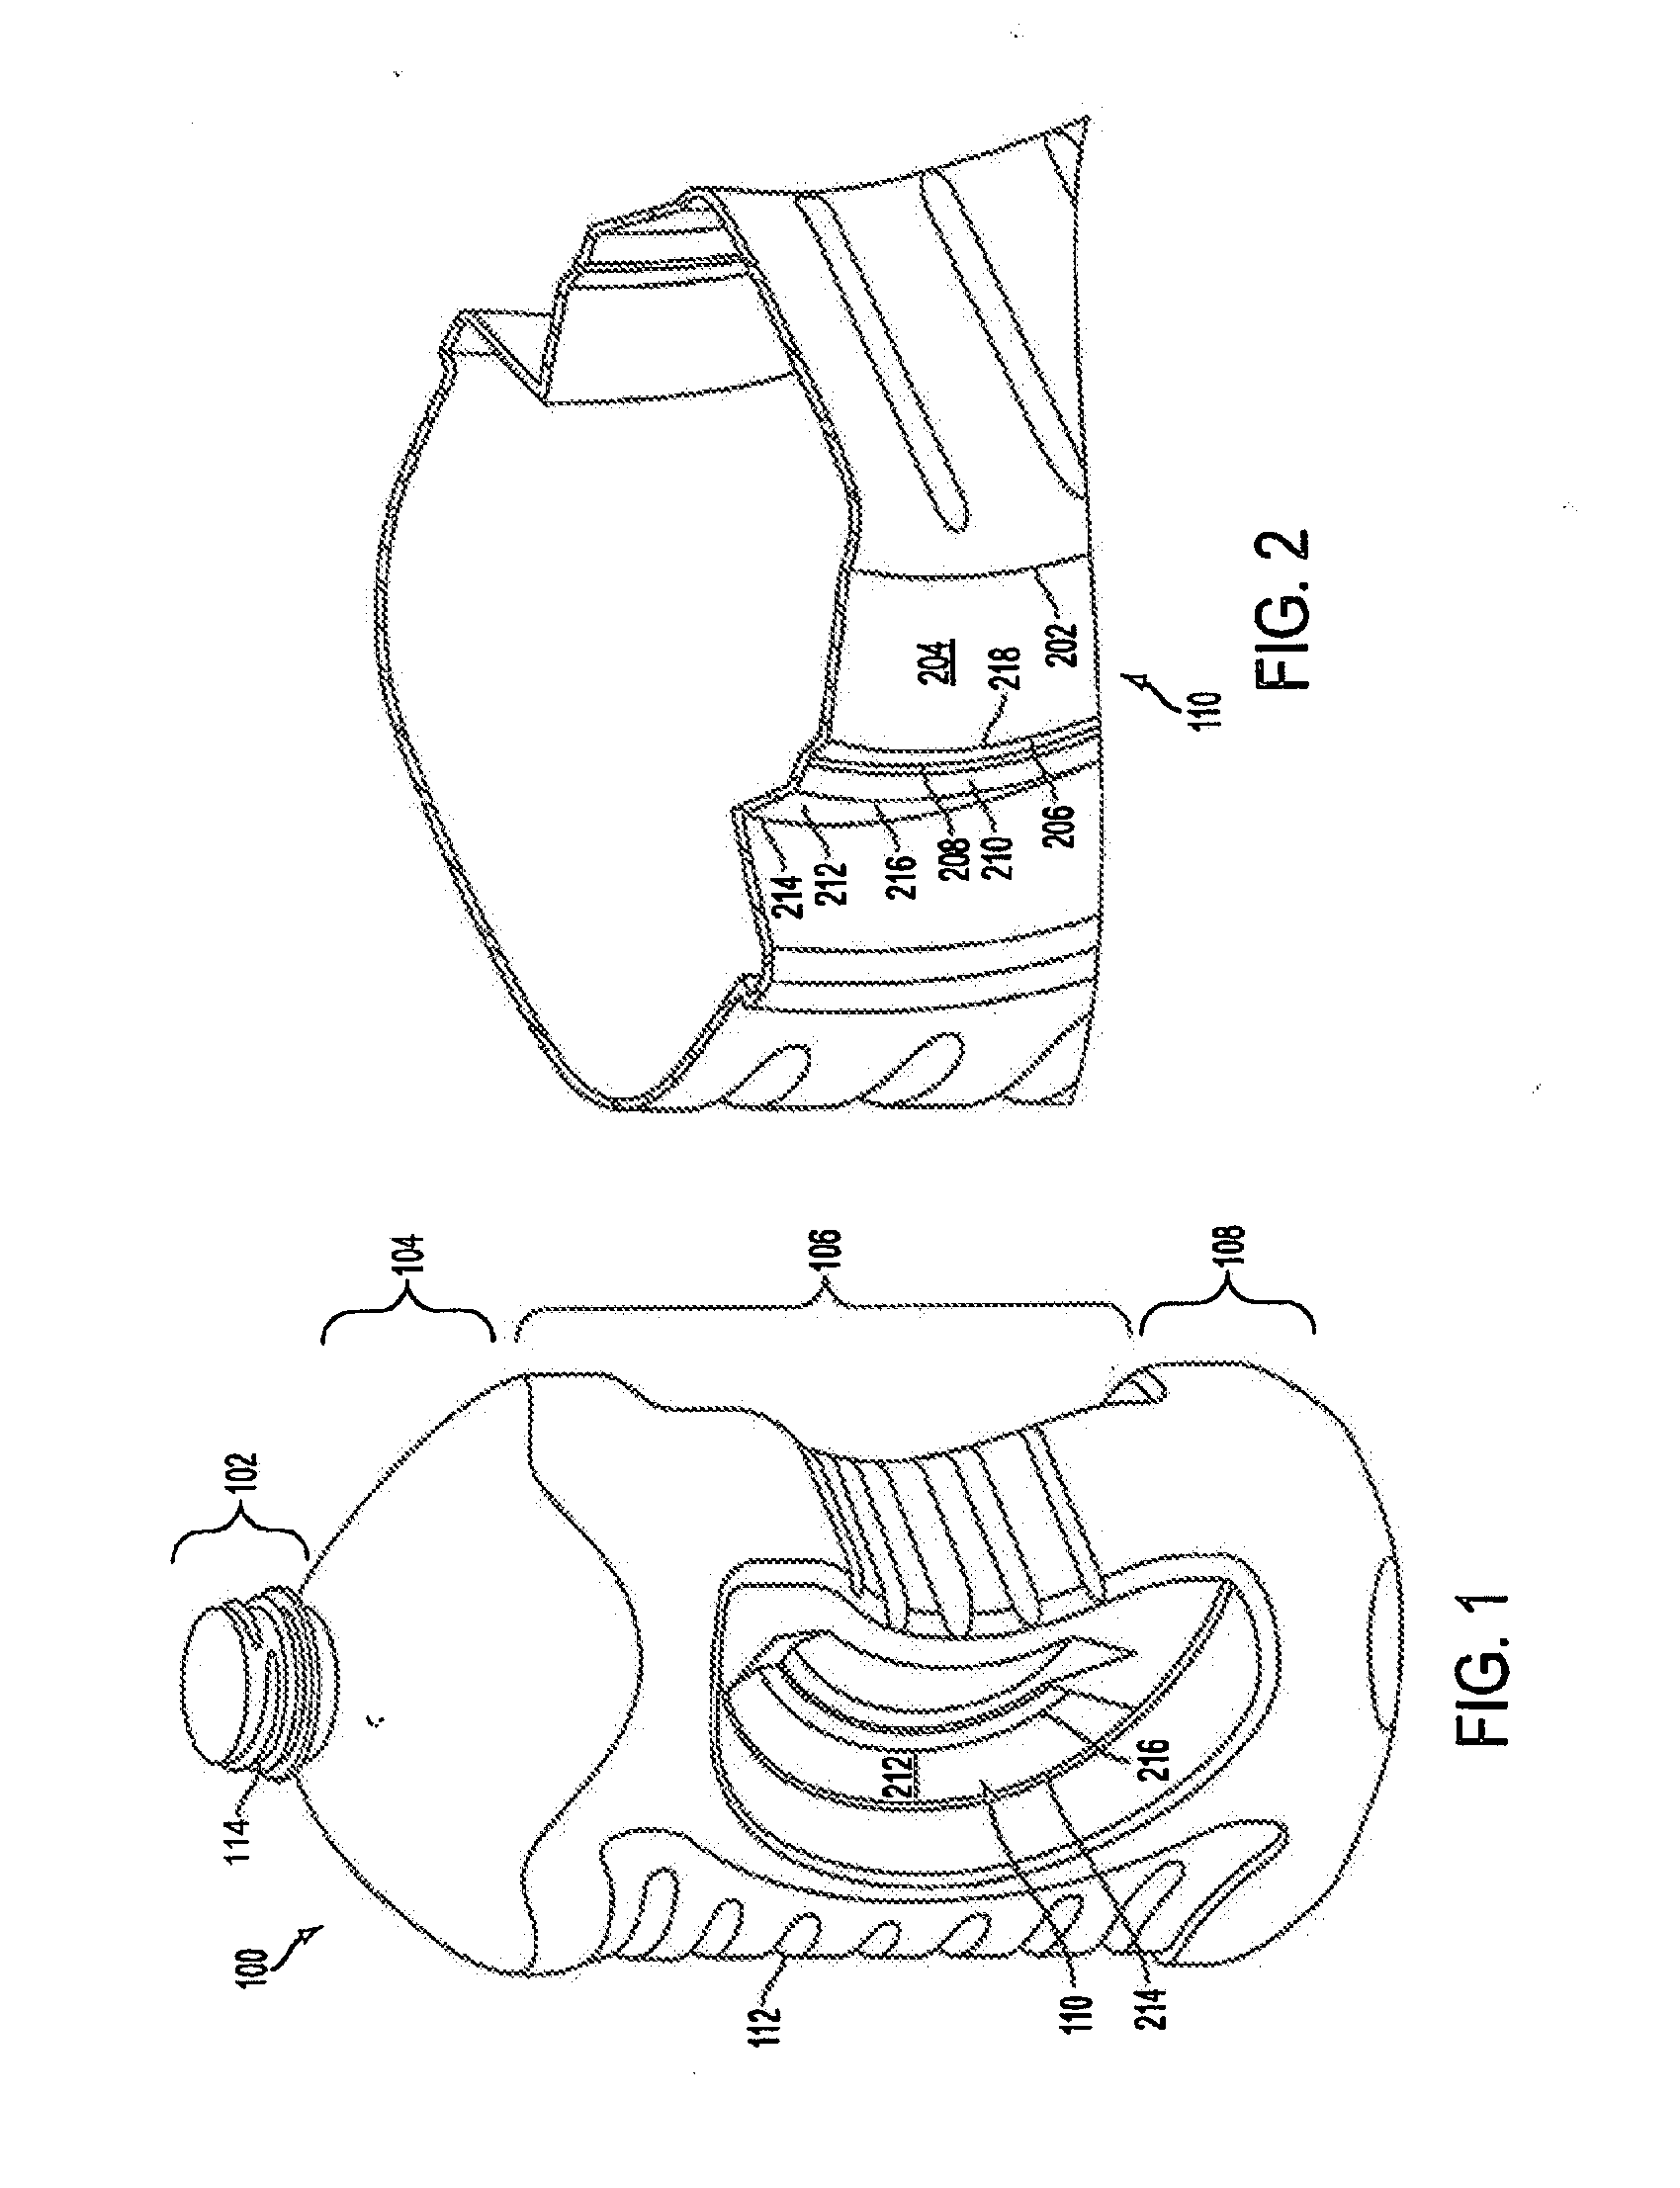 System and Method for Forming a Container Having a Grip Region